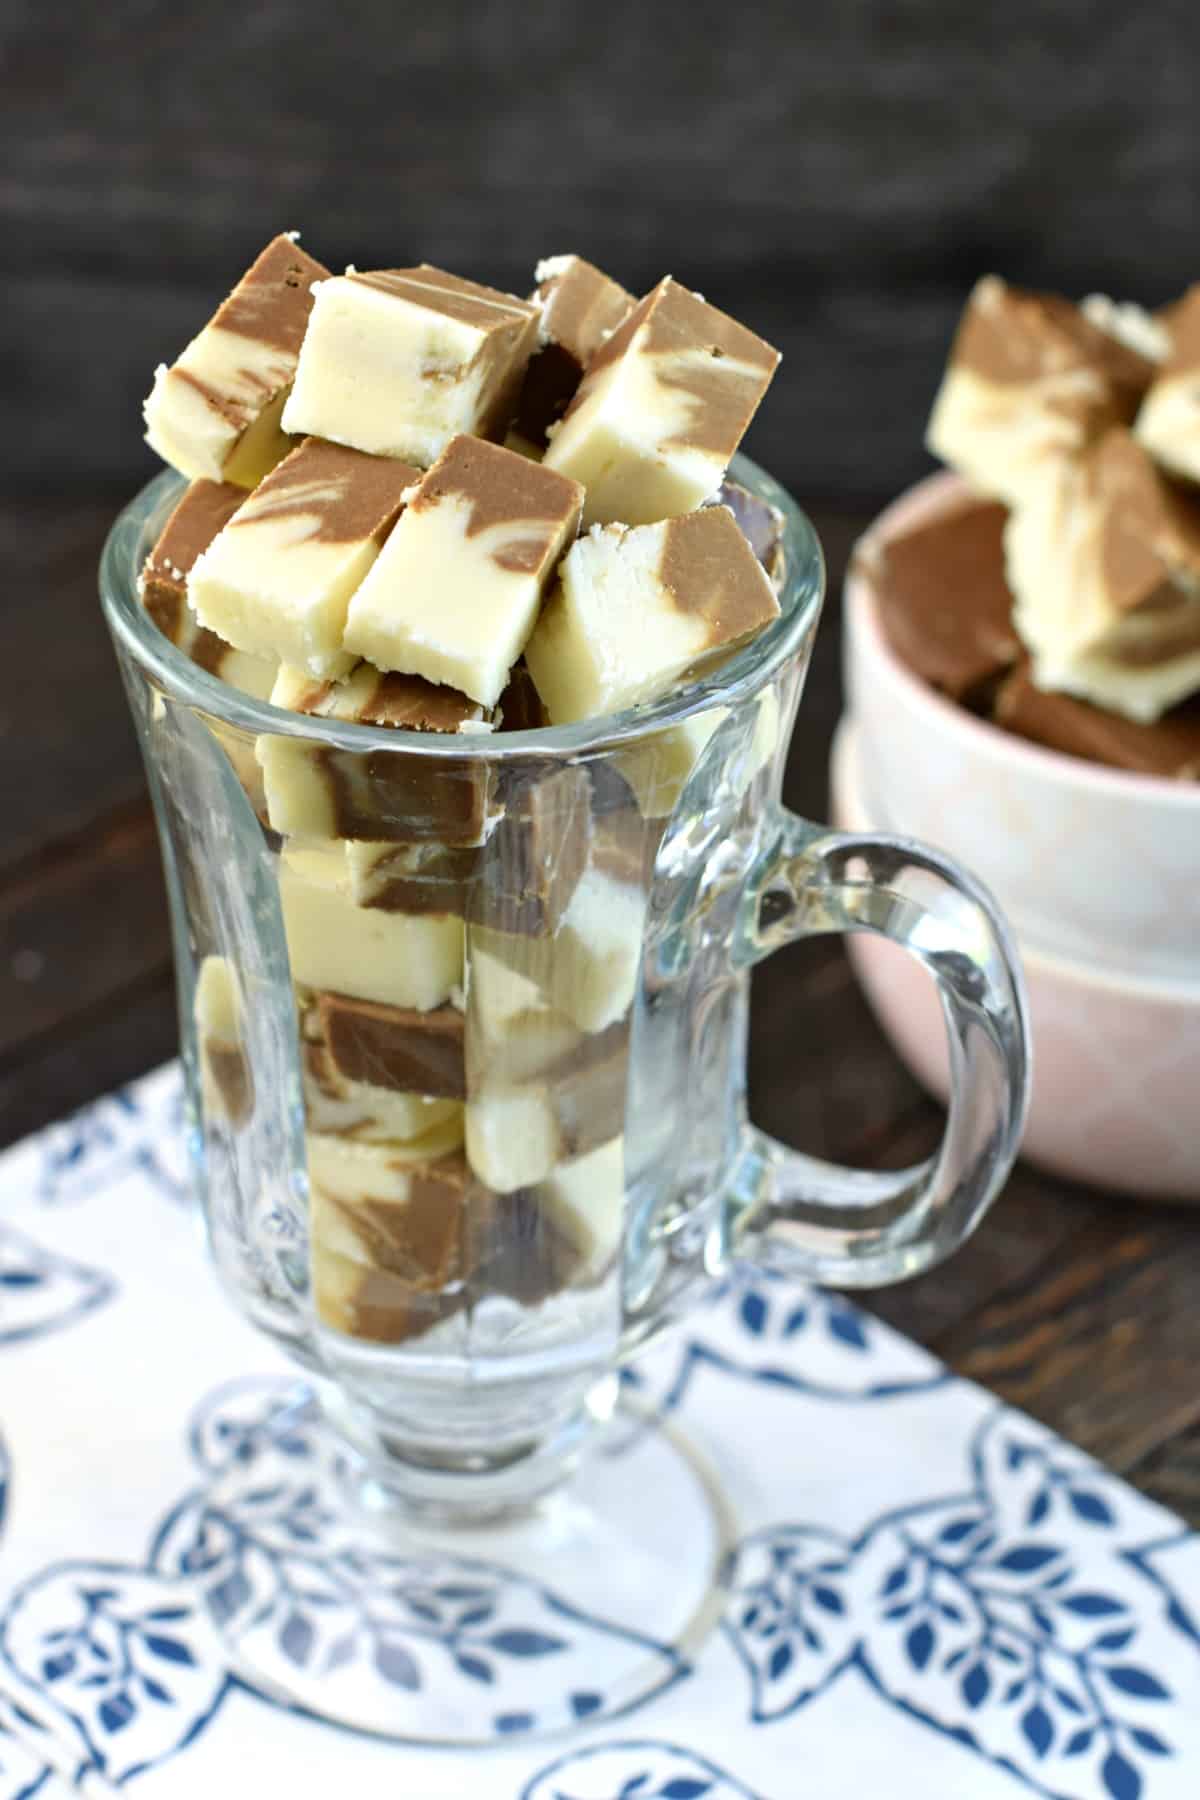 Clear glass mug with pieces of root beer fudge.